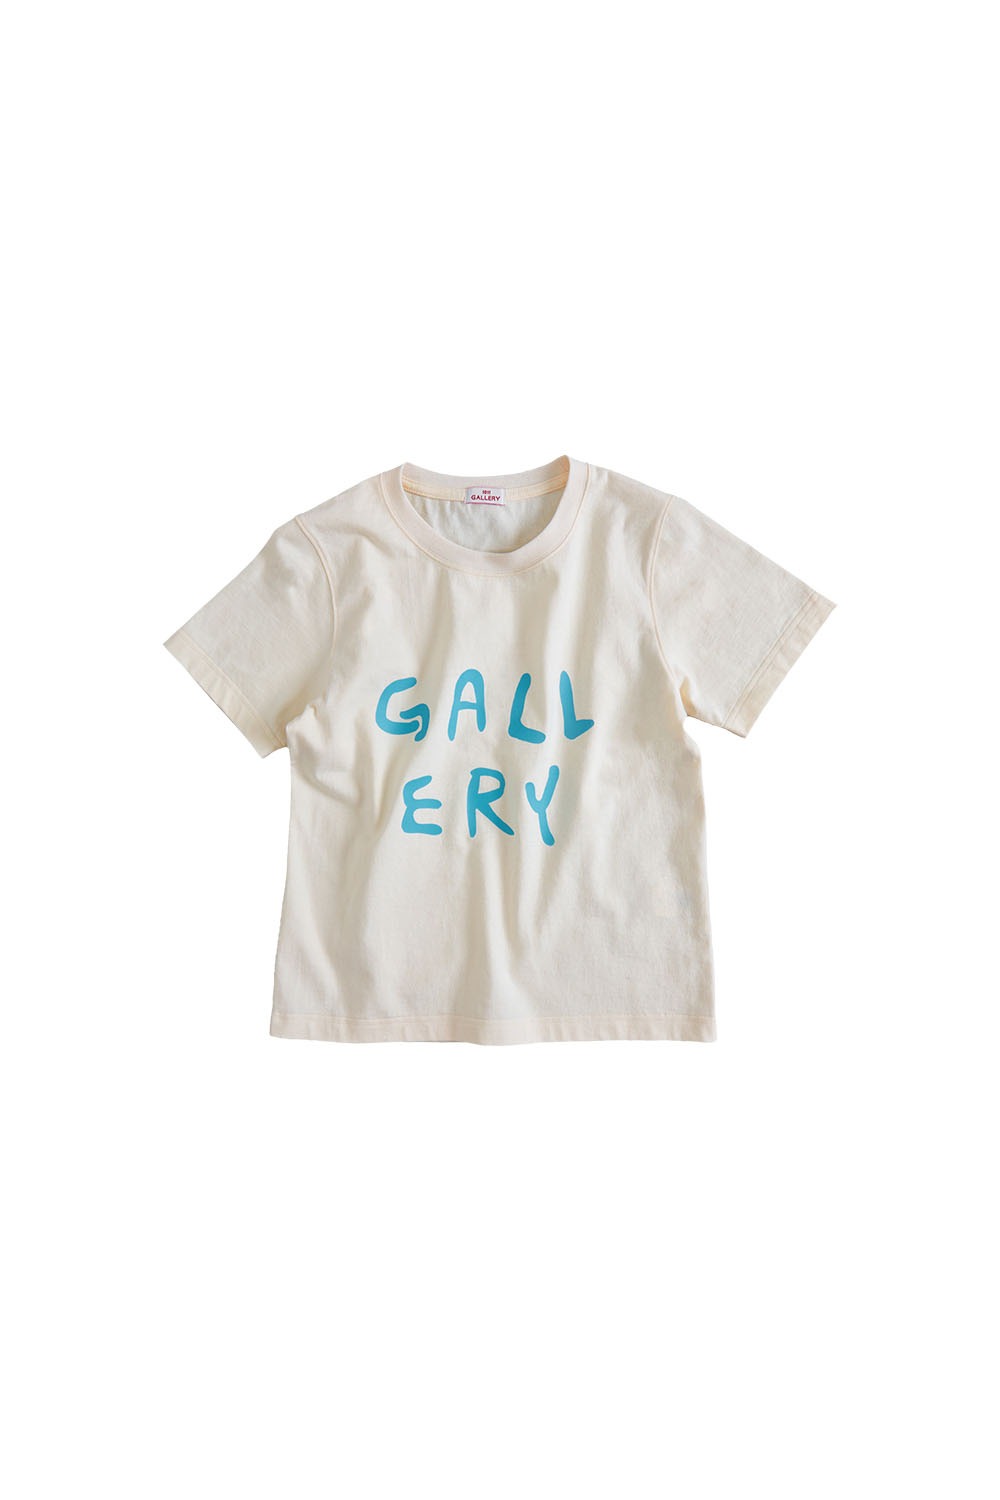 Gallery Baby T-shirt - Ivory